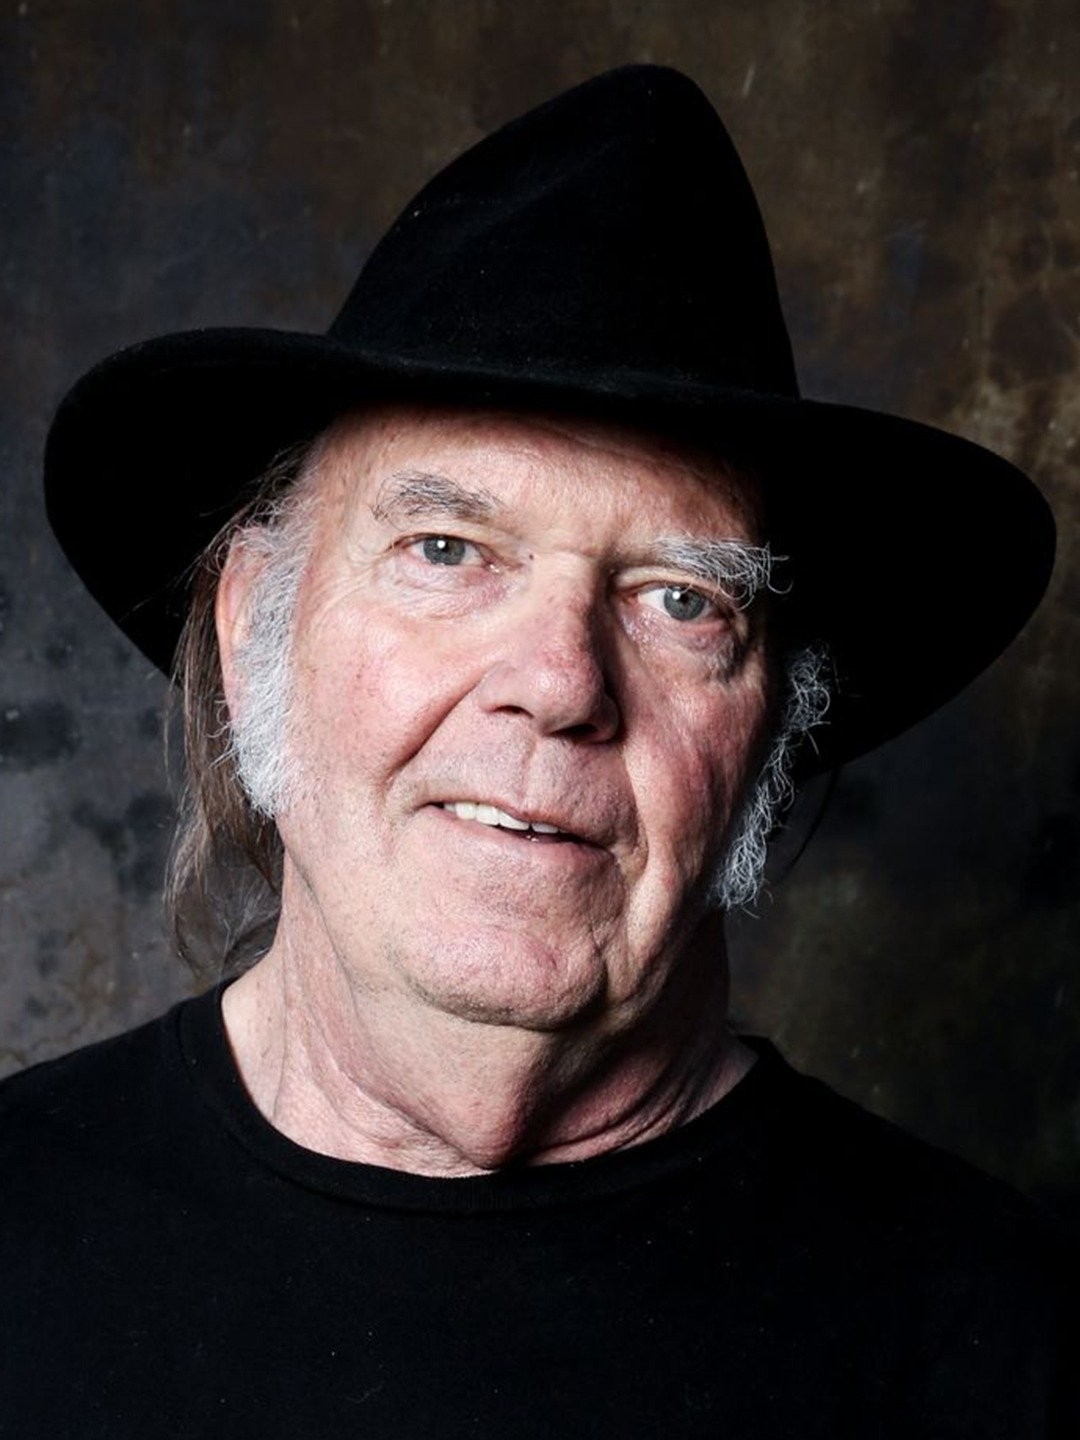 Neil Young: 70 things you need to know about the Canadian rock